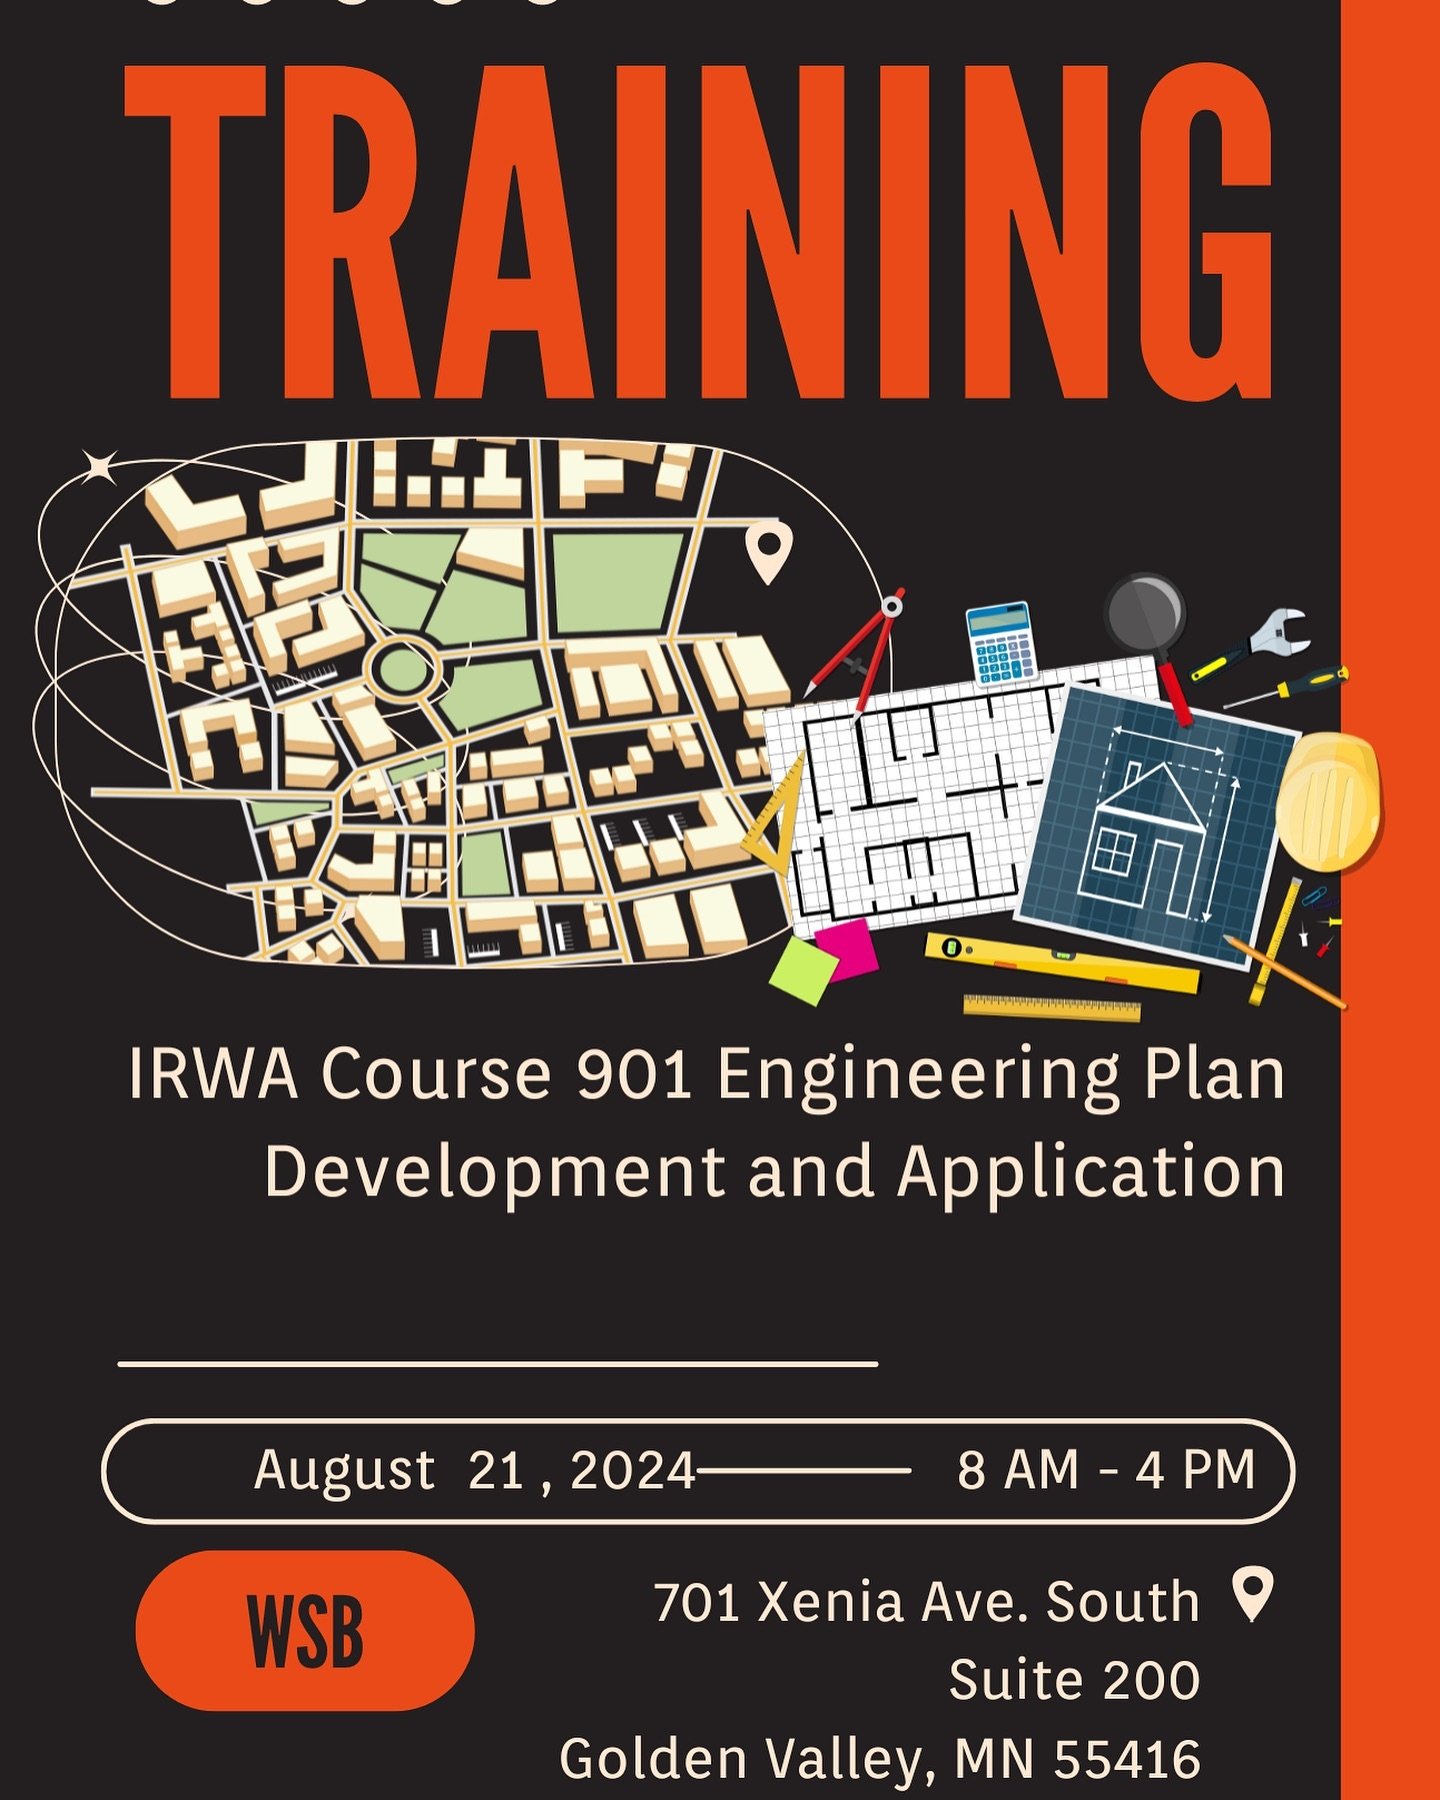 Great opportunity to learn more about Right of Way Engineering Plans, cross sections, topography, state plane coordinates and more! 
REGISTER: https://www.irwaonline.org/courses/6/901-engineering-plan-development-and-application/description/?evt_key=